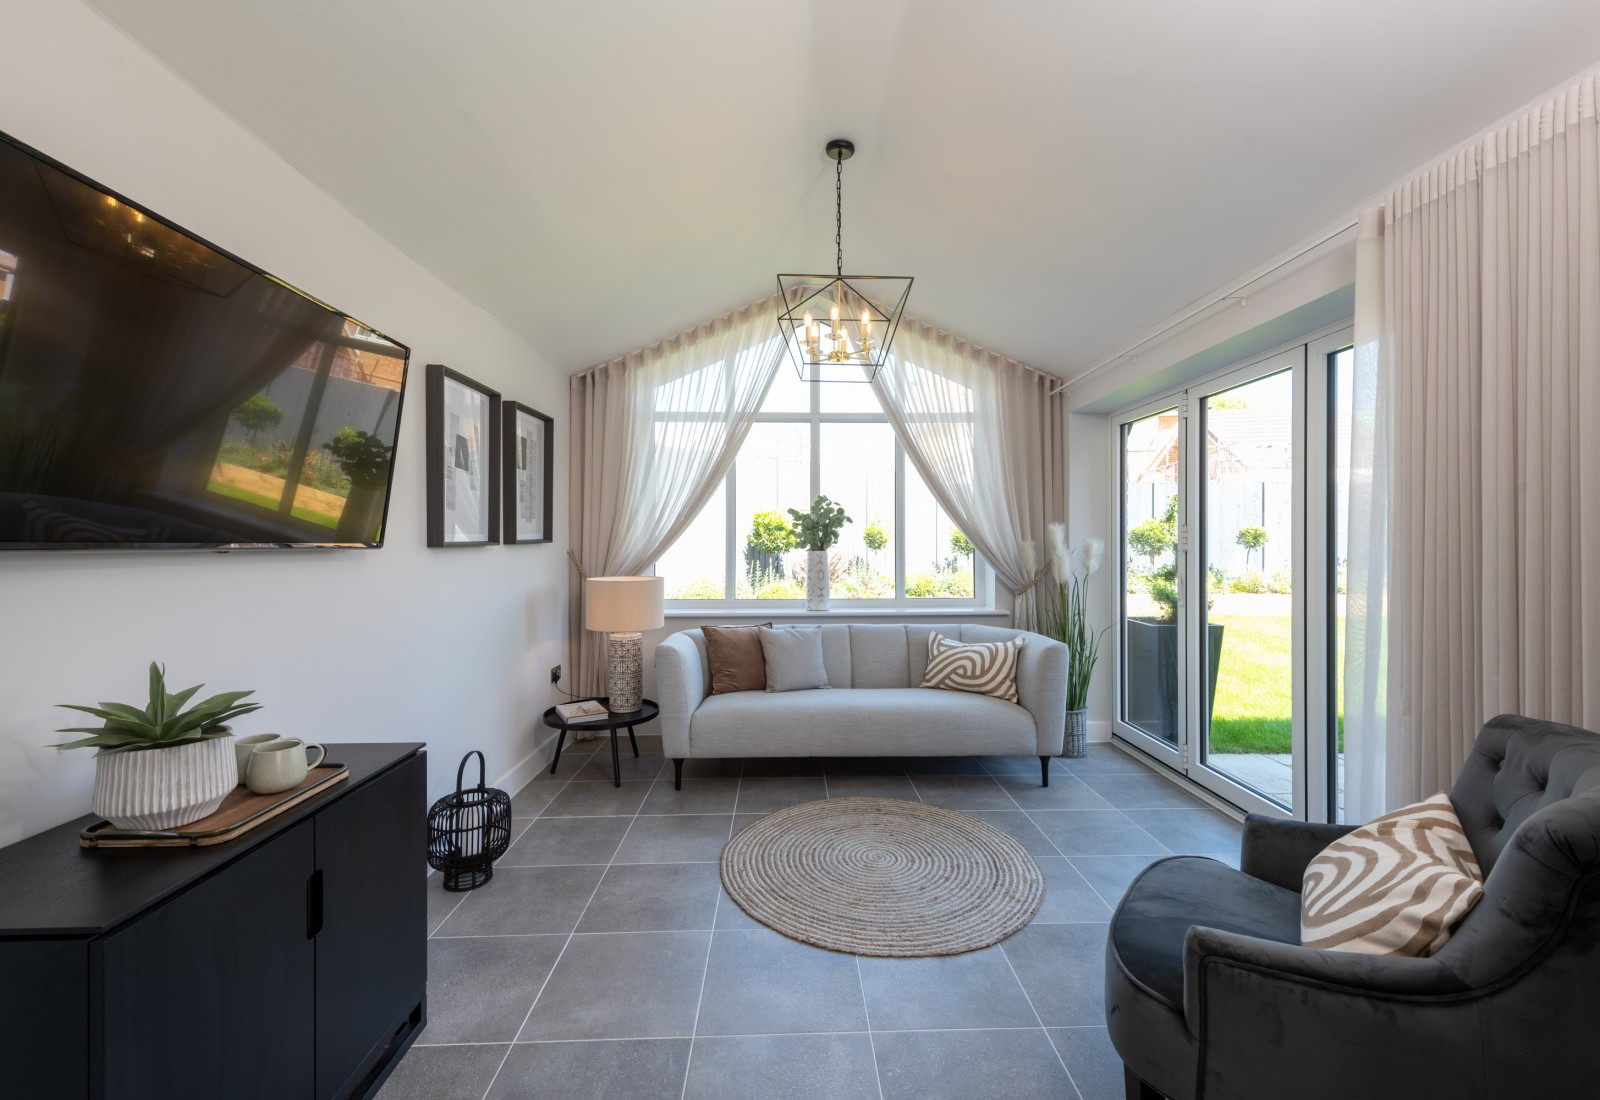 The Northwood Showhome